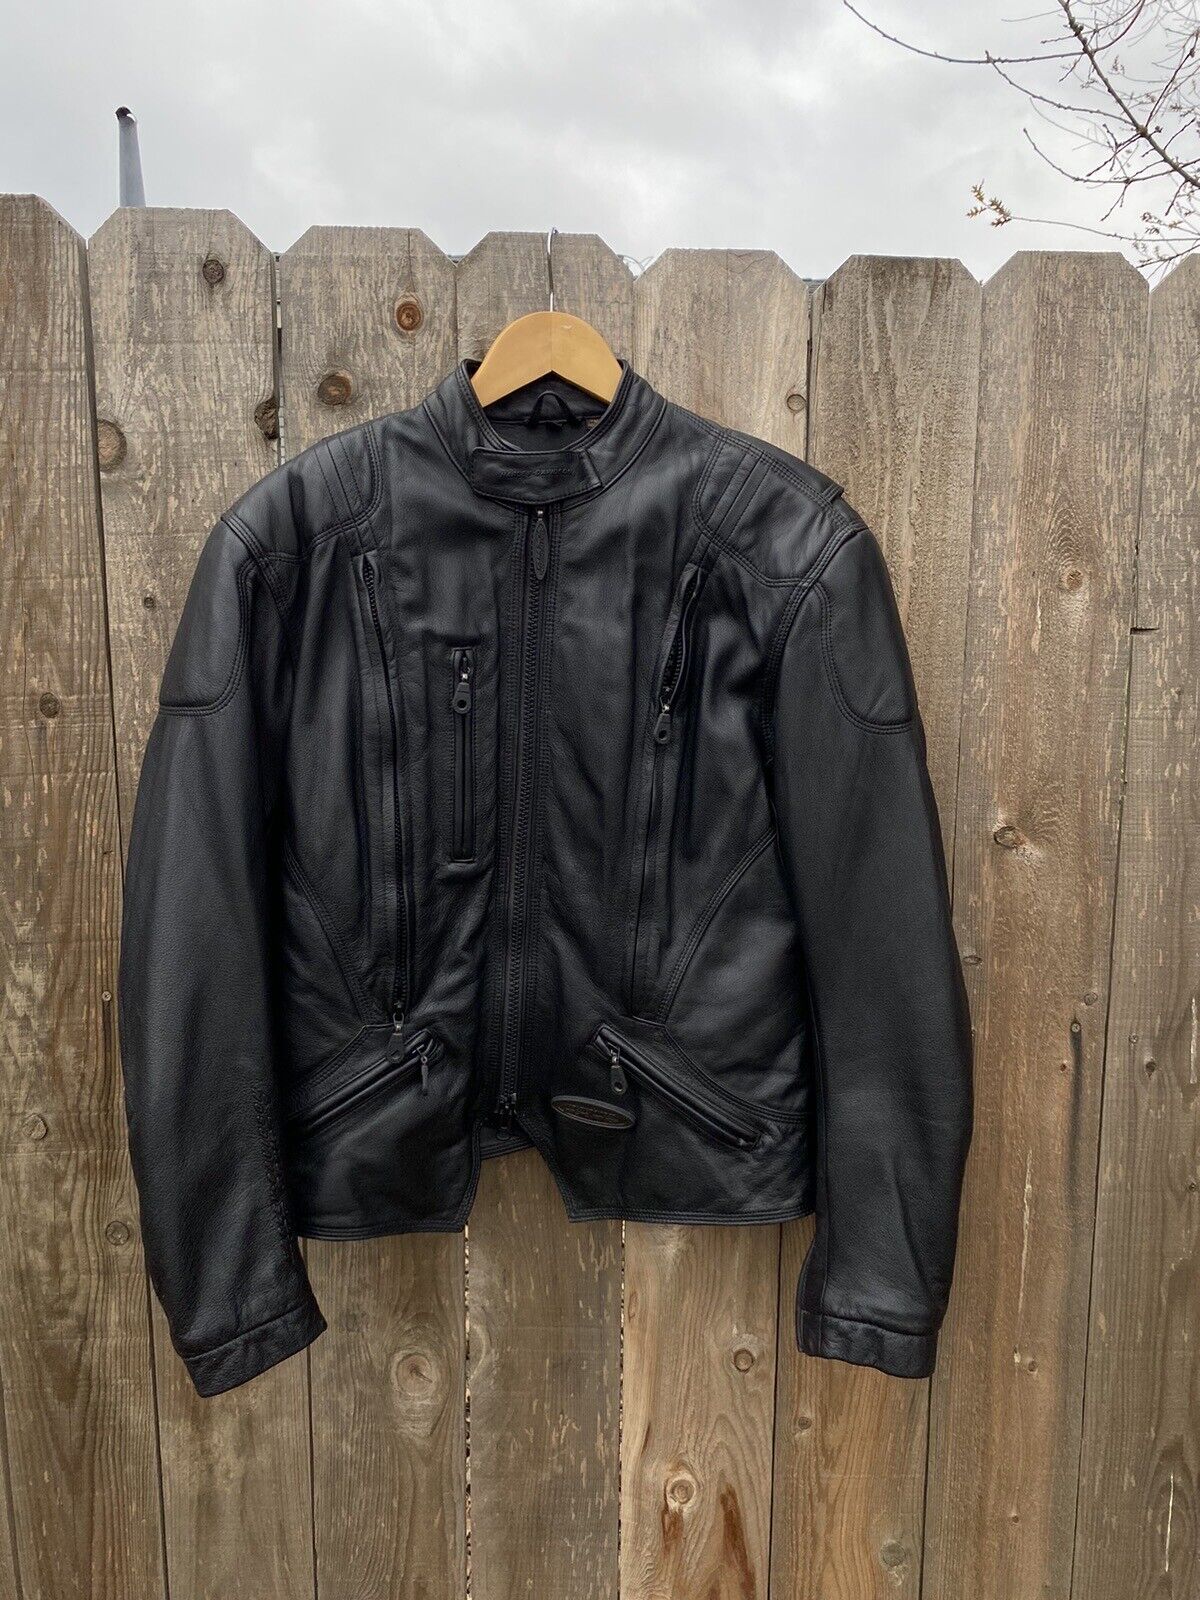 Vintage 2000s Woman\'s Harley Davidson Riding Jacket Size L With Pads